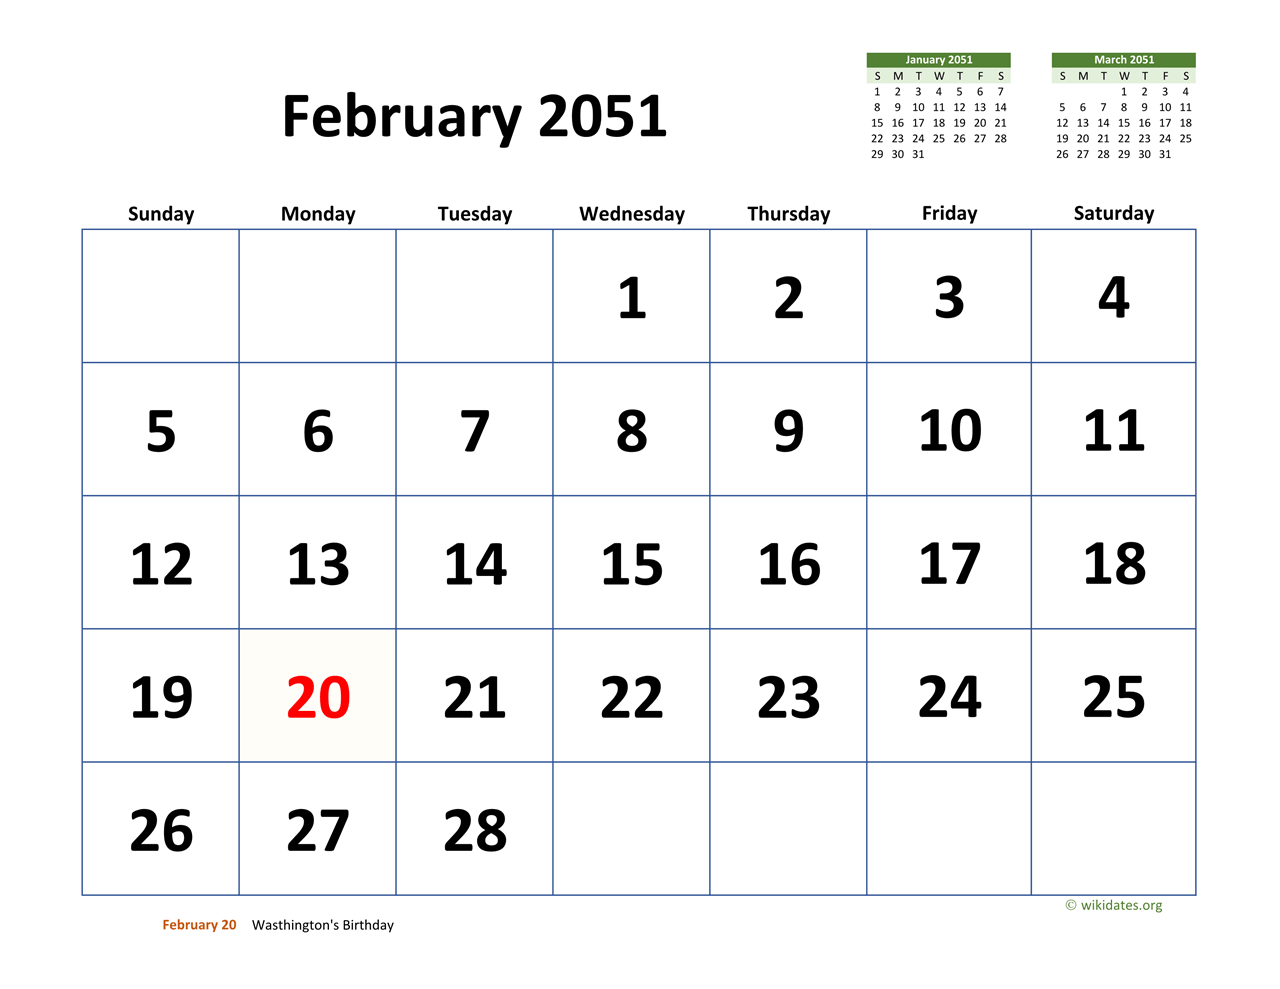 February 2051 Calendar with Extralarge Dates